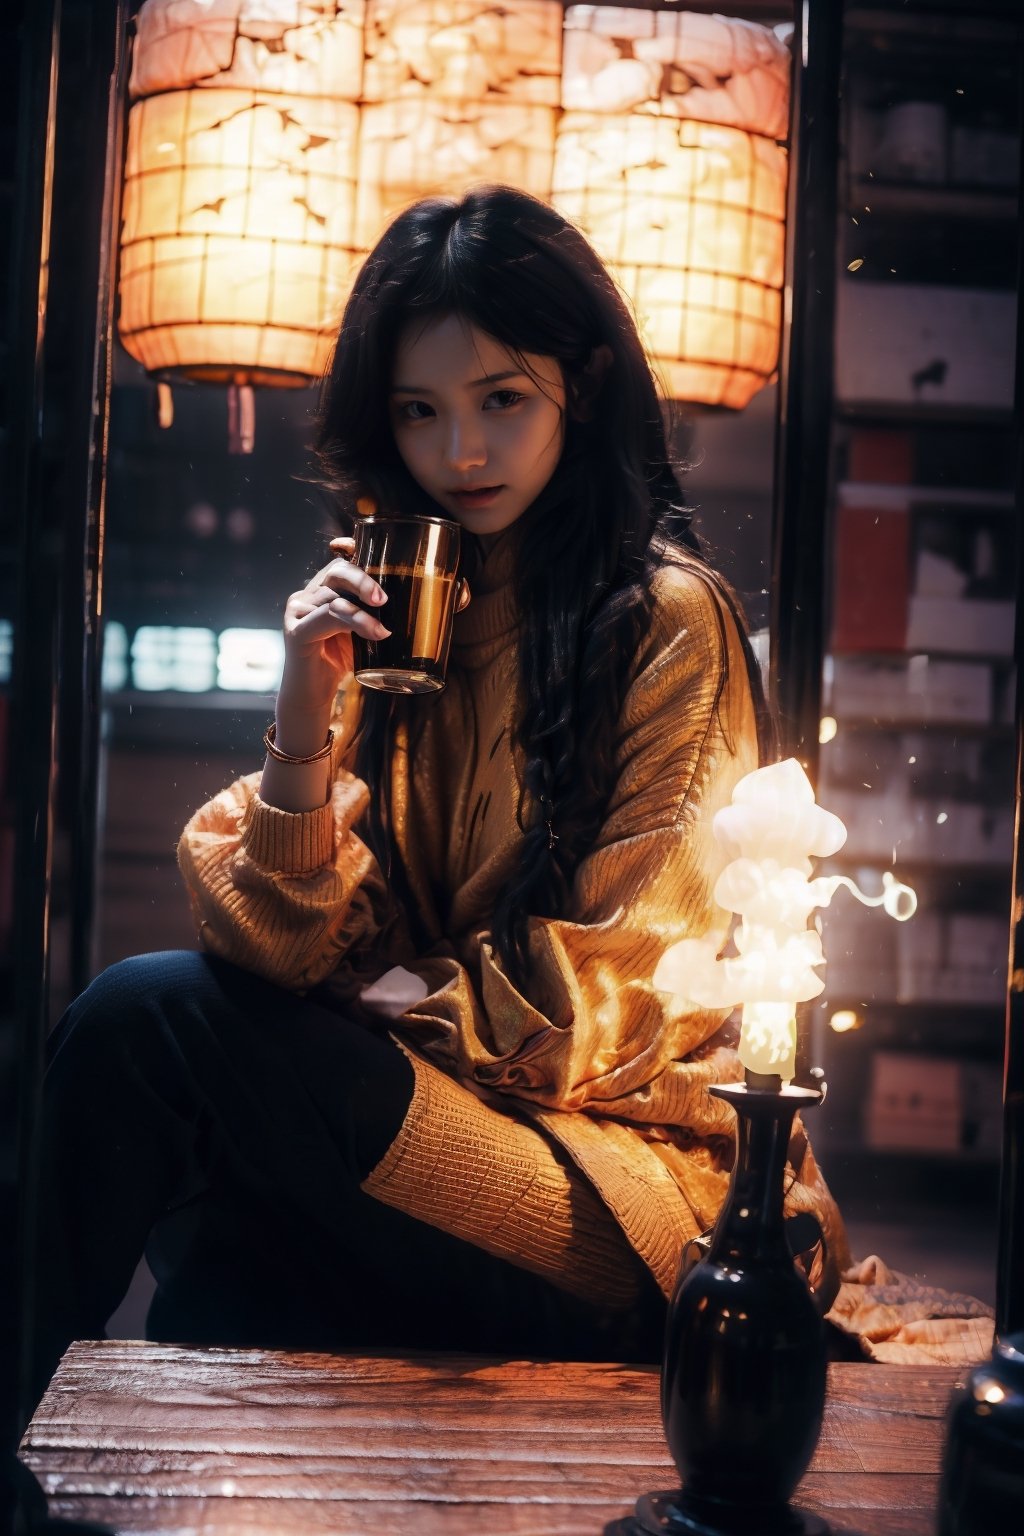 This photo shows a Asian woman wearing a warm and textured sweater,holding a steaming cup in her hand. She sat in the dimly lit room,with soft golden lights illuminating her side. The lady is braiding her hair,seemingly fully focused on this moment,perhaps savoring the aroma of the drink. The background has a rural feel,with a plant in the vase and textured walls.
,Samurai girl